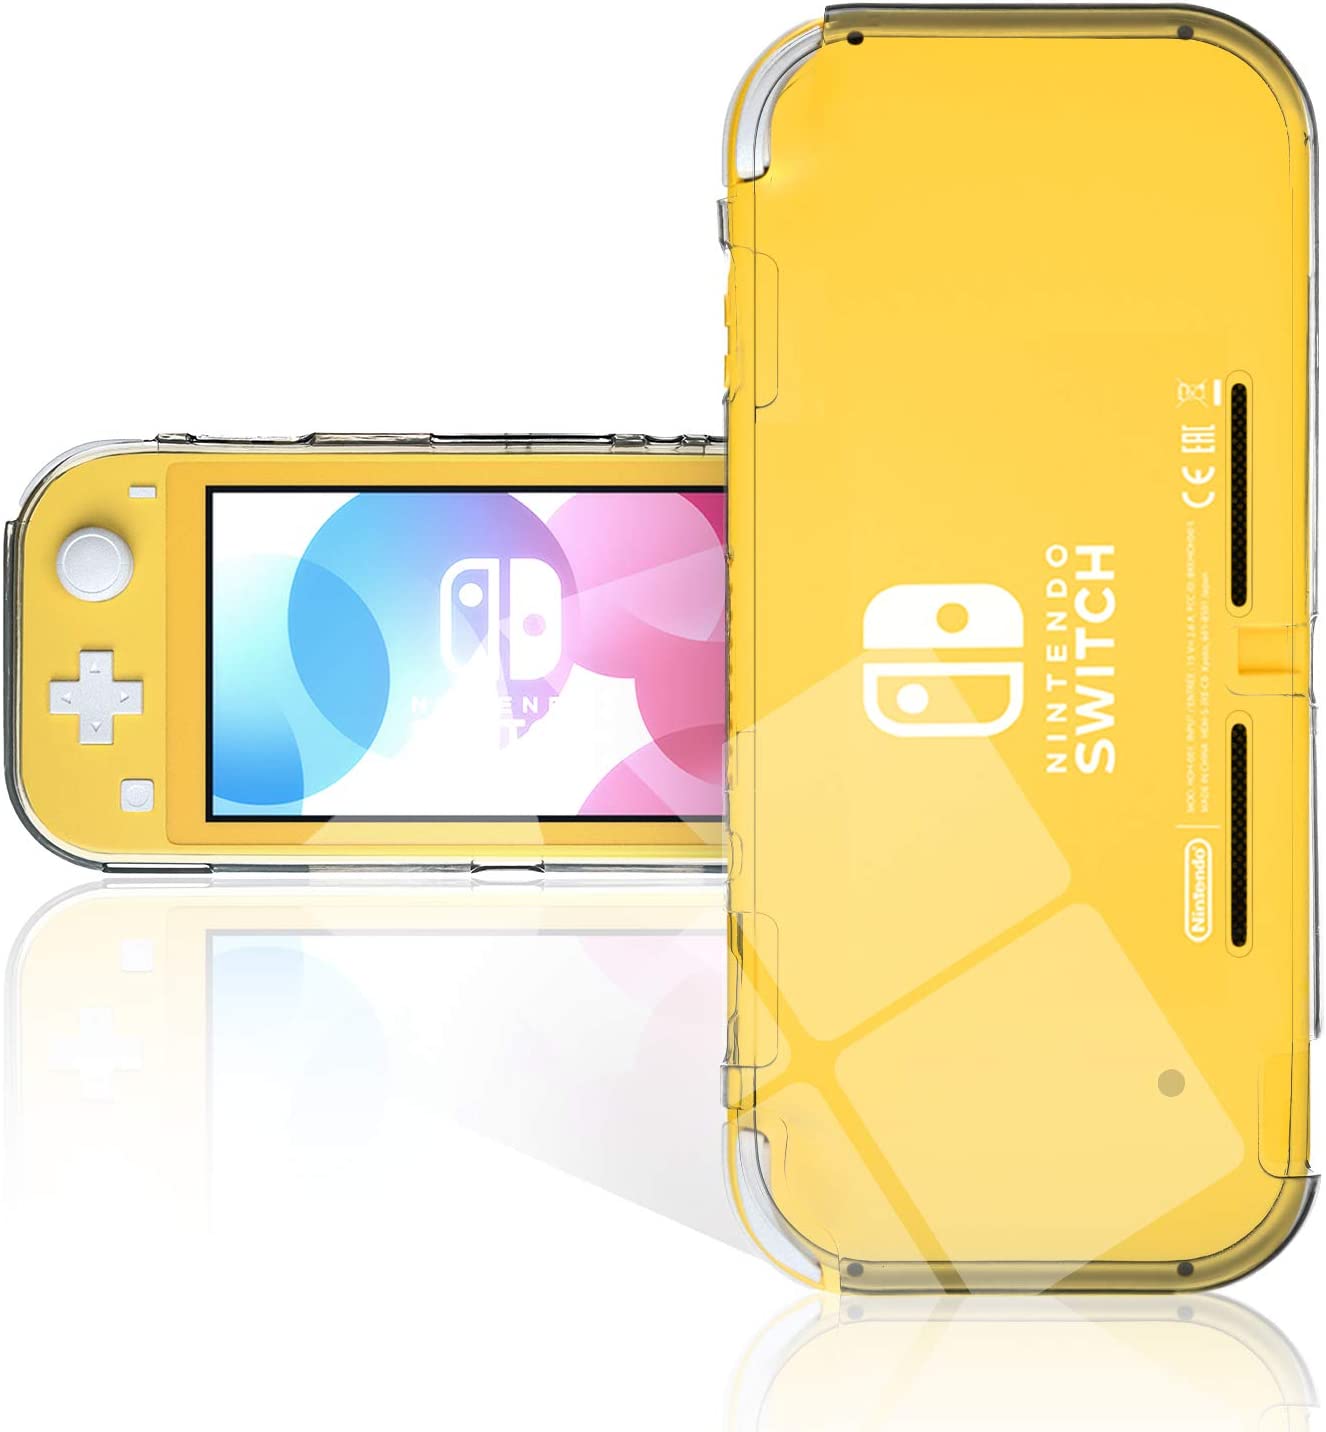 TPU Case Compatible with Switch Lite, Flexible Soft Protective Cover Case Compatible with Switch lite 2019 - Turquoise